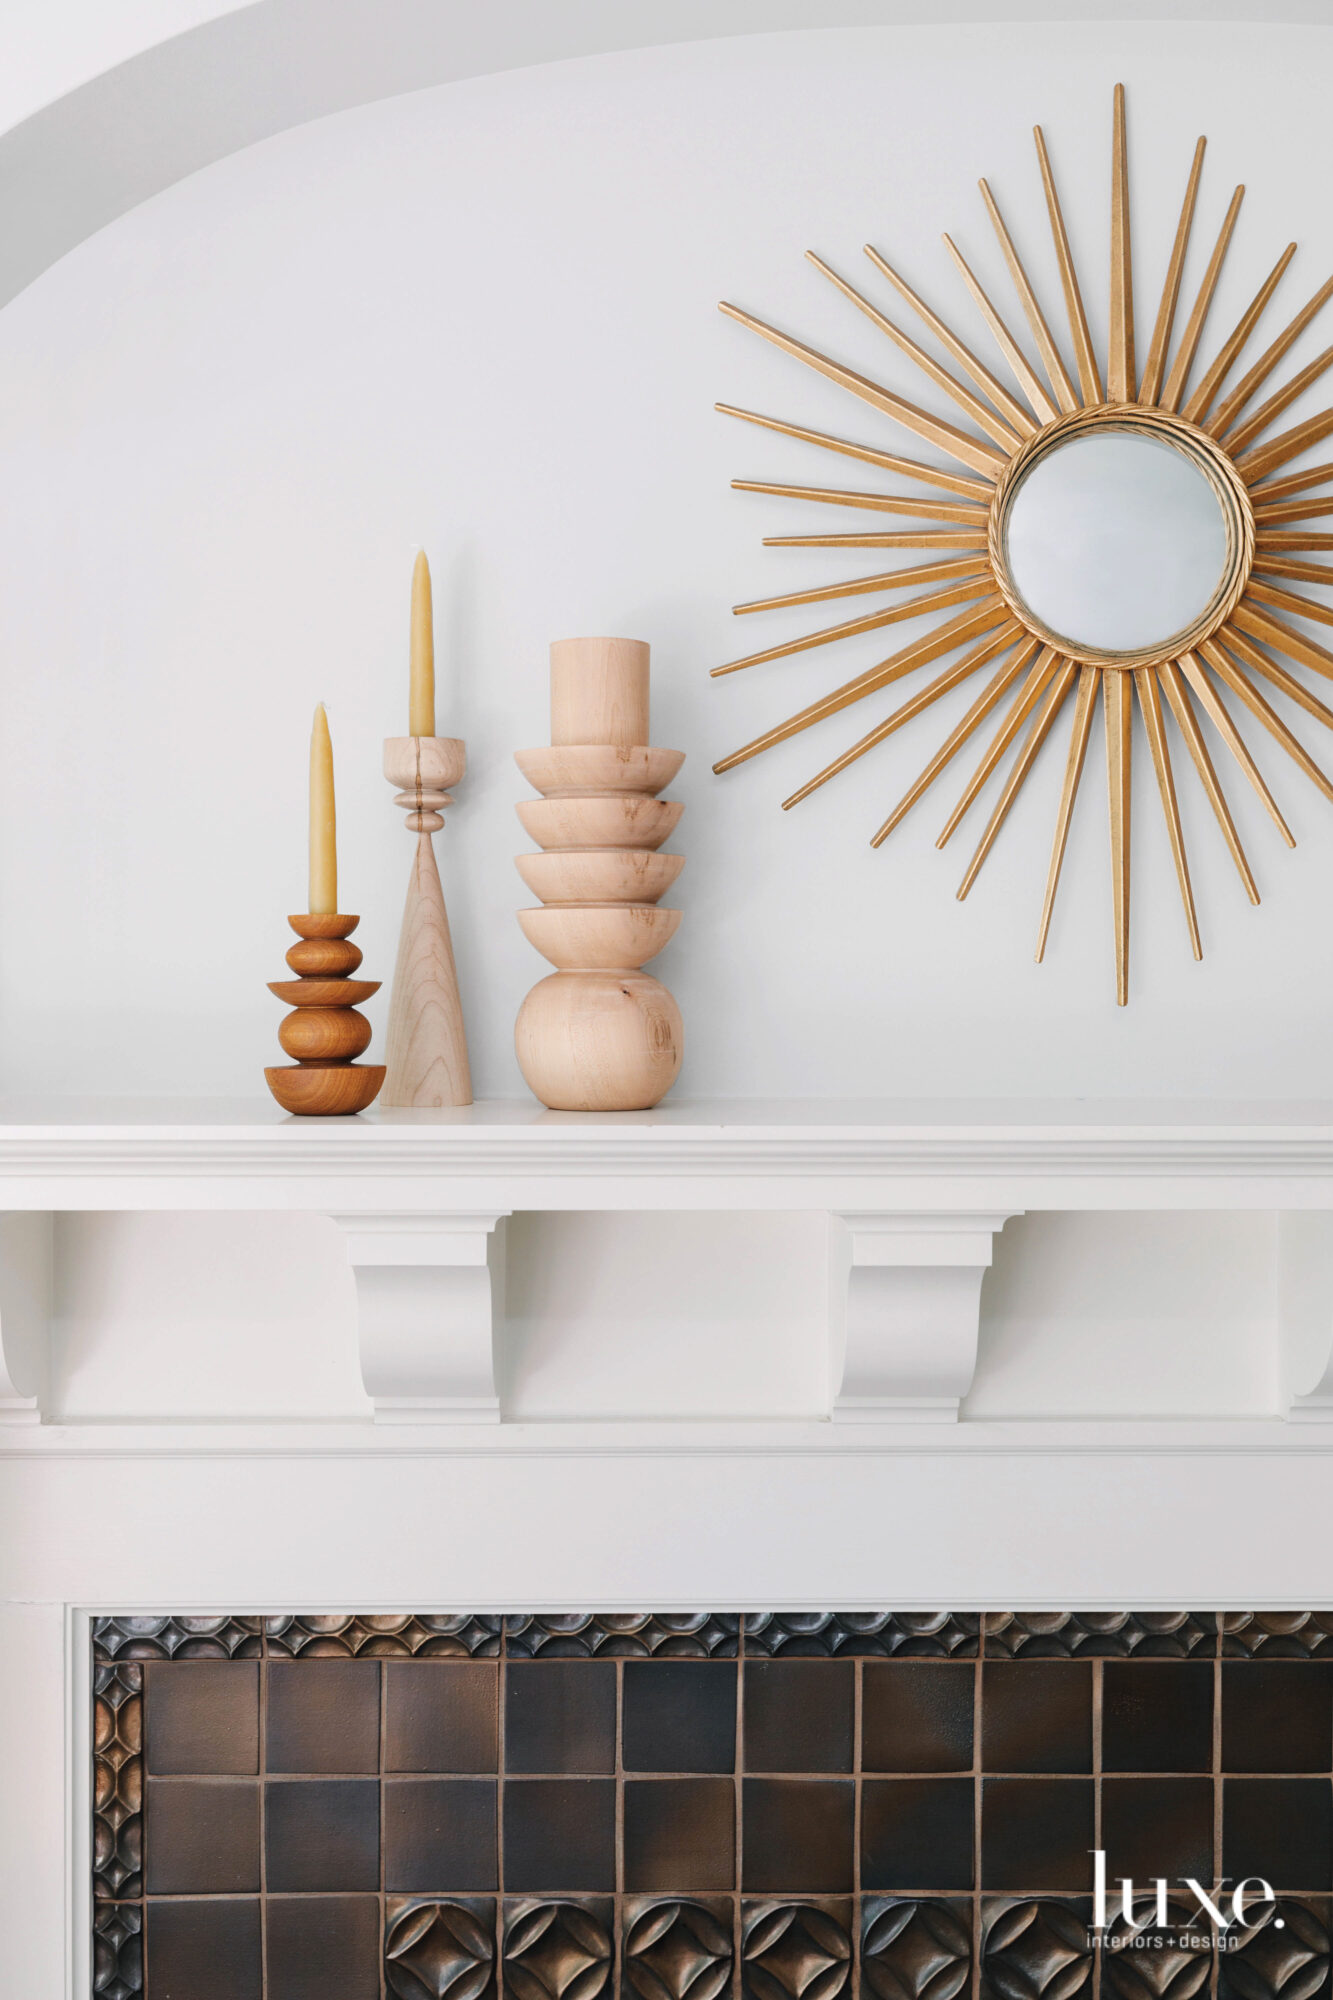 Whimsical decor pieces sit on a mantel above the fireplace